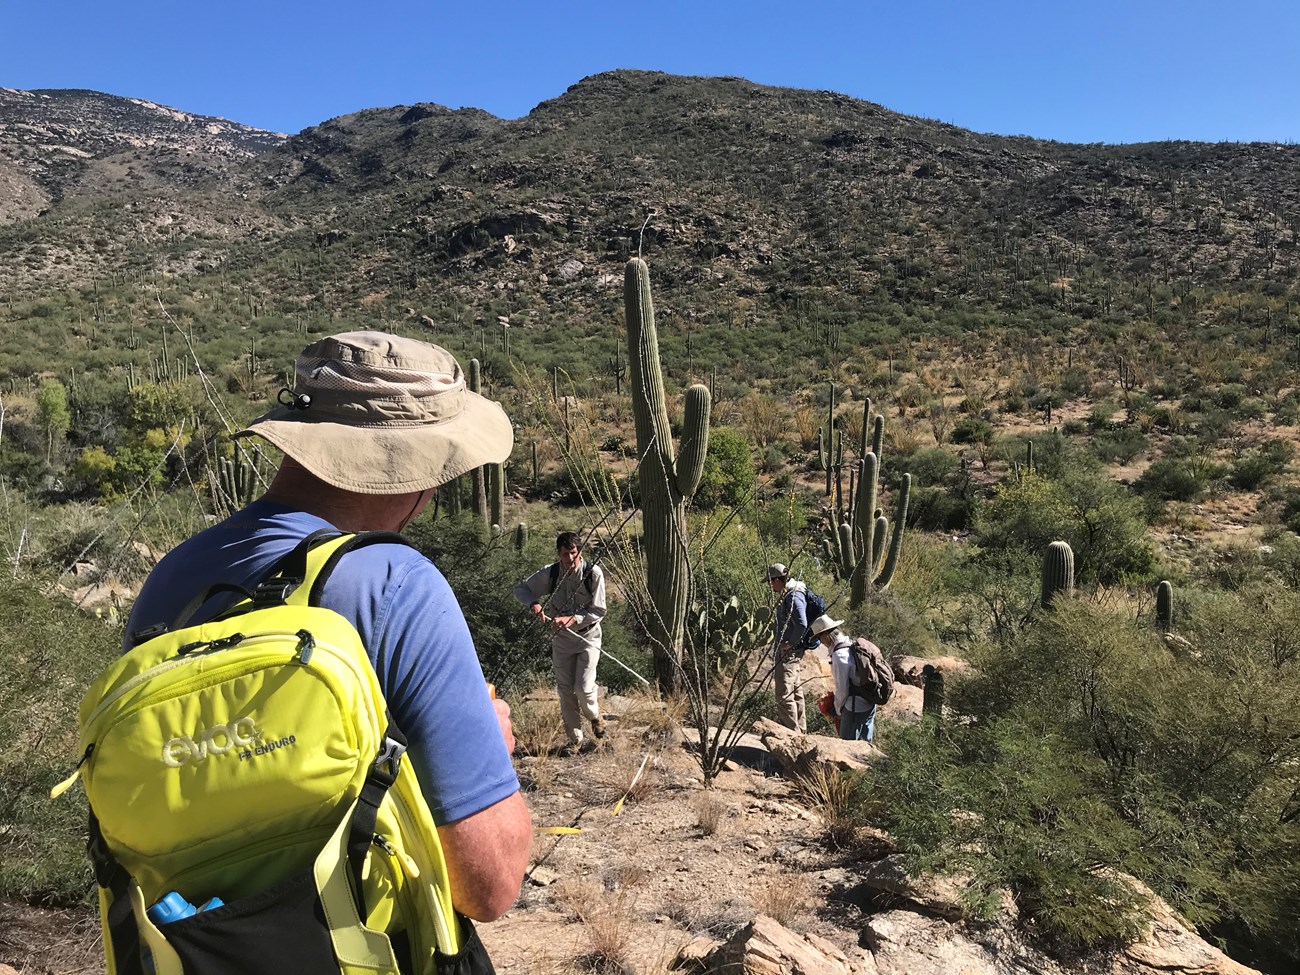 Park volunteers using a tape measure to measure distance from a saguaro